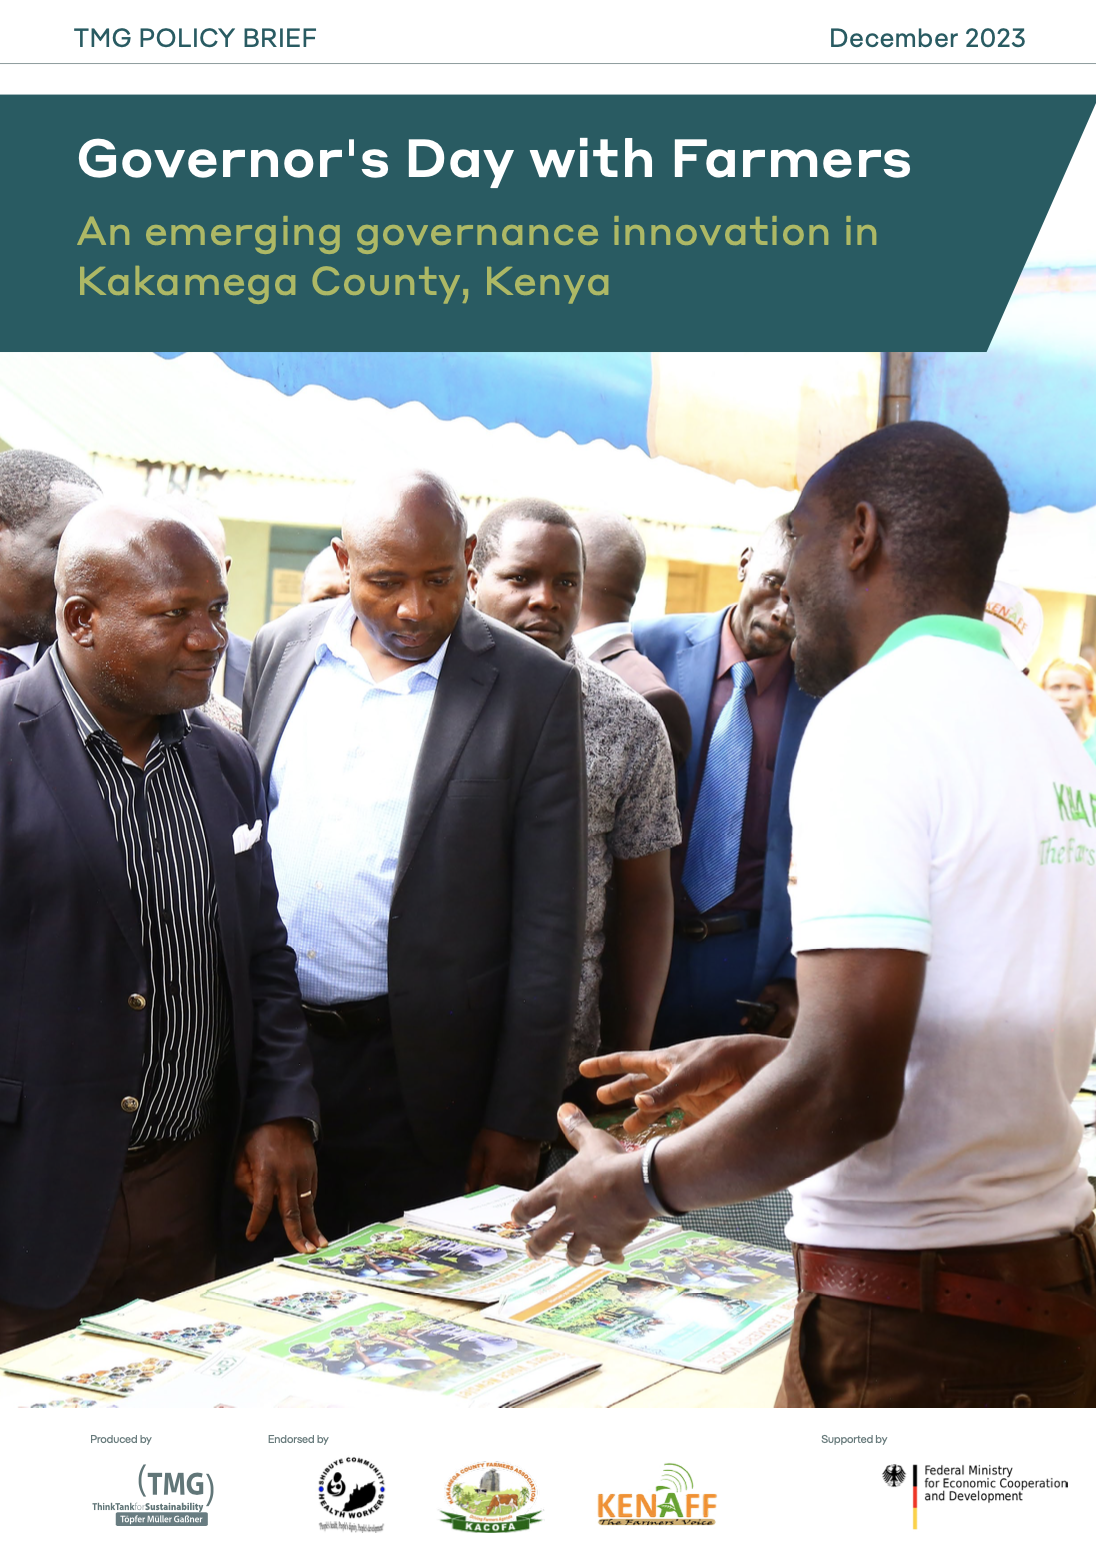 Governor's Day with Farmers - An emerging governance innovation in Kakamega County, Kenya